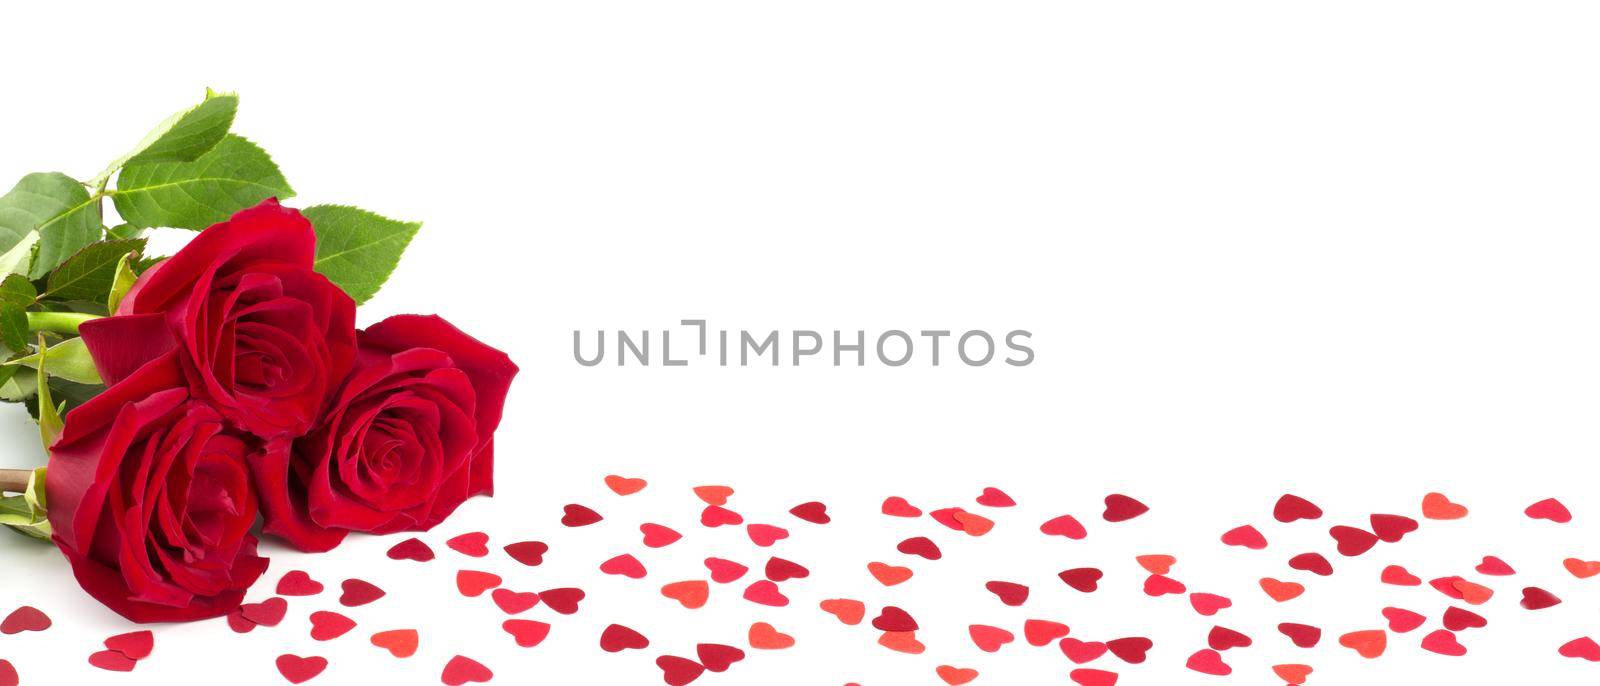 Red roses and hearts on white background by destillat